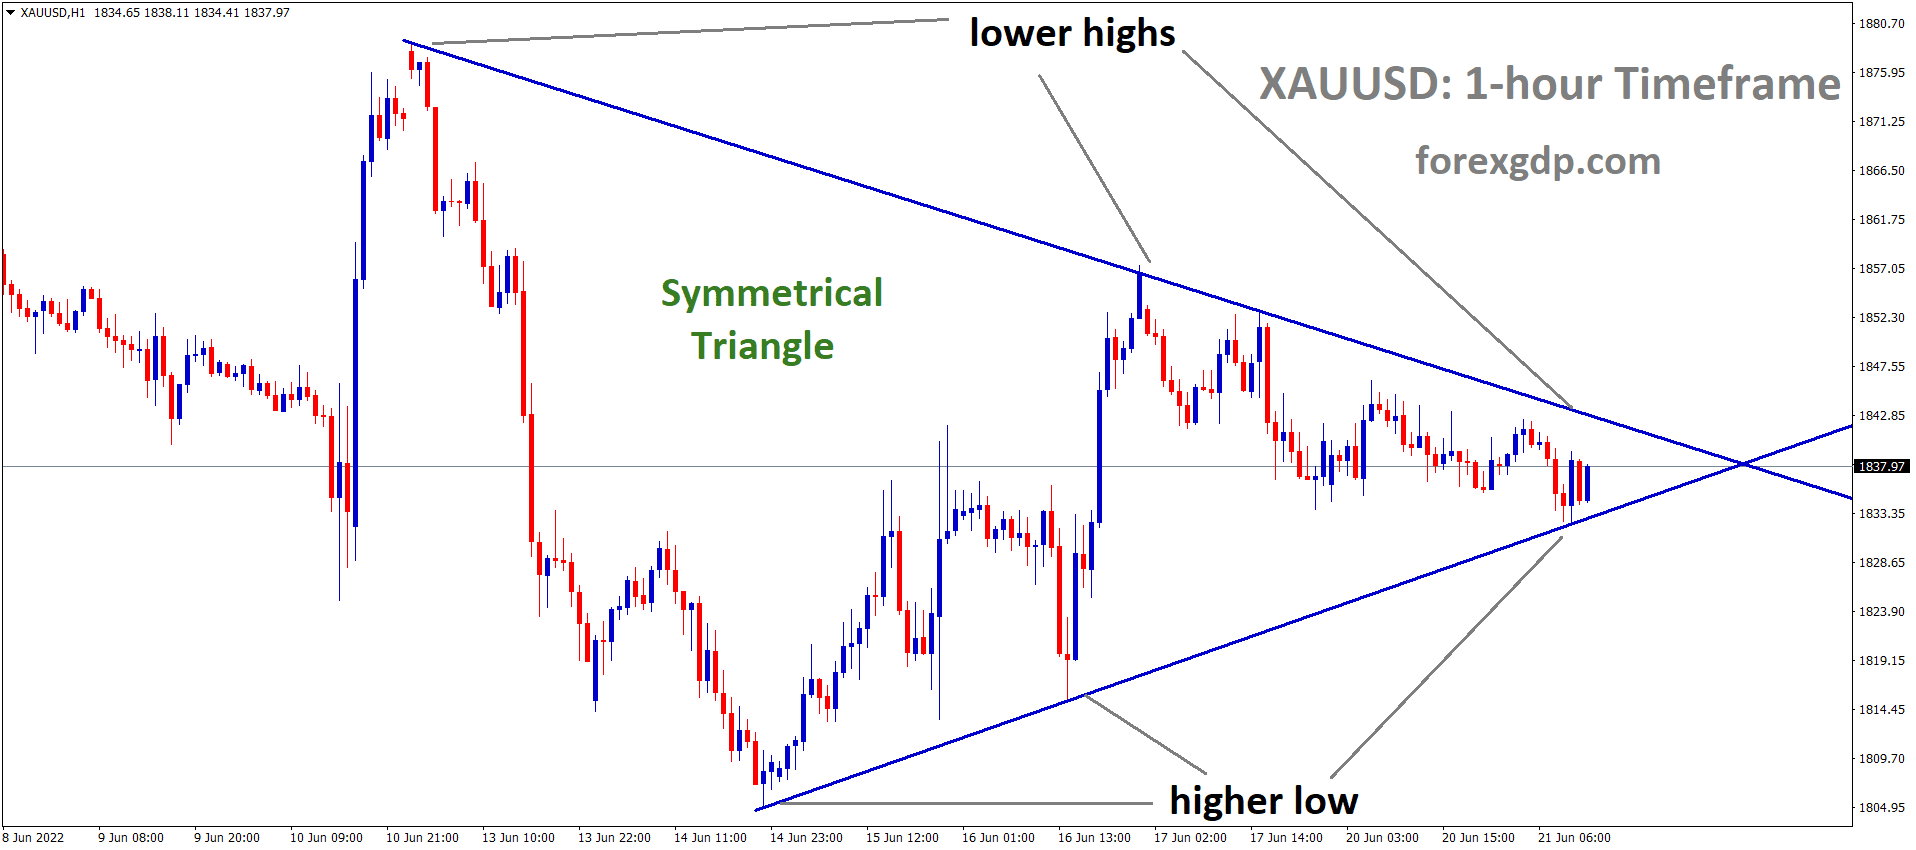 XAUUSD Gold price is moving in the Symmetrical triangle pattern and the Market has rebounded from the bottom area of the pattern